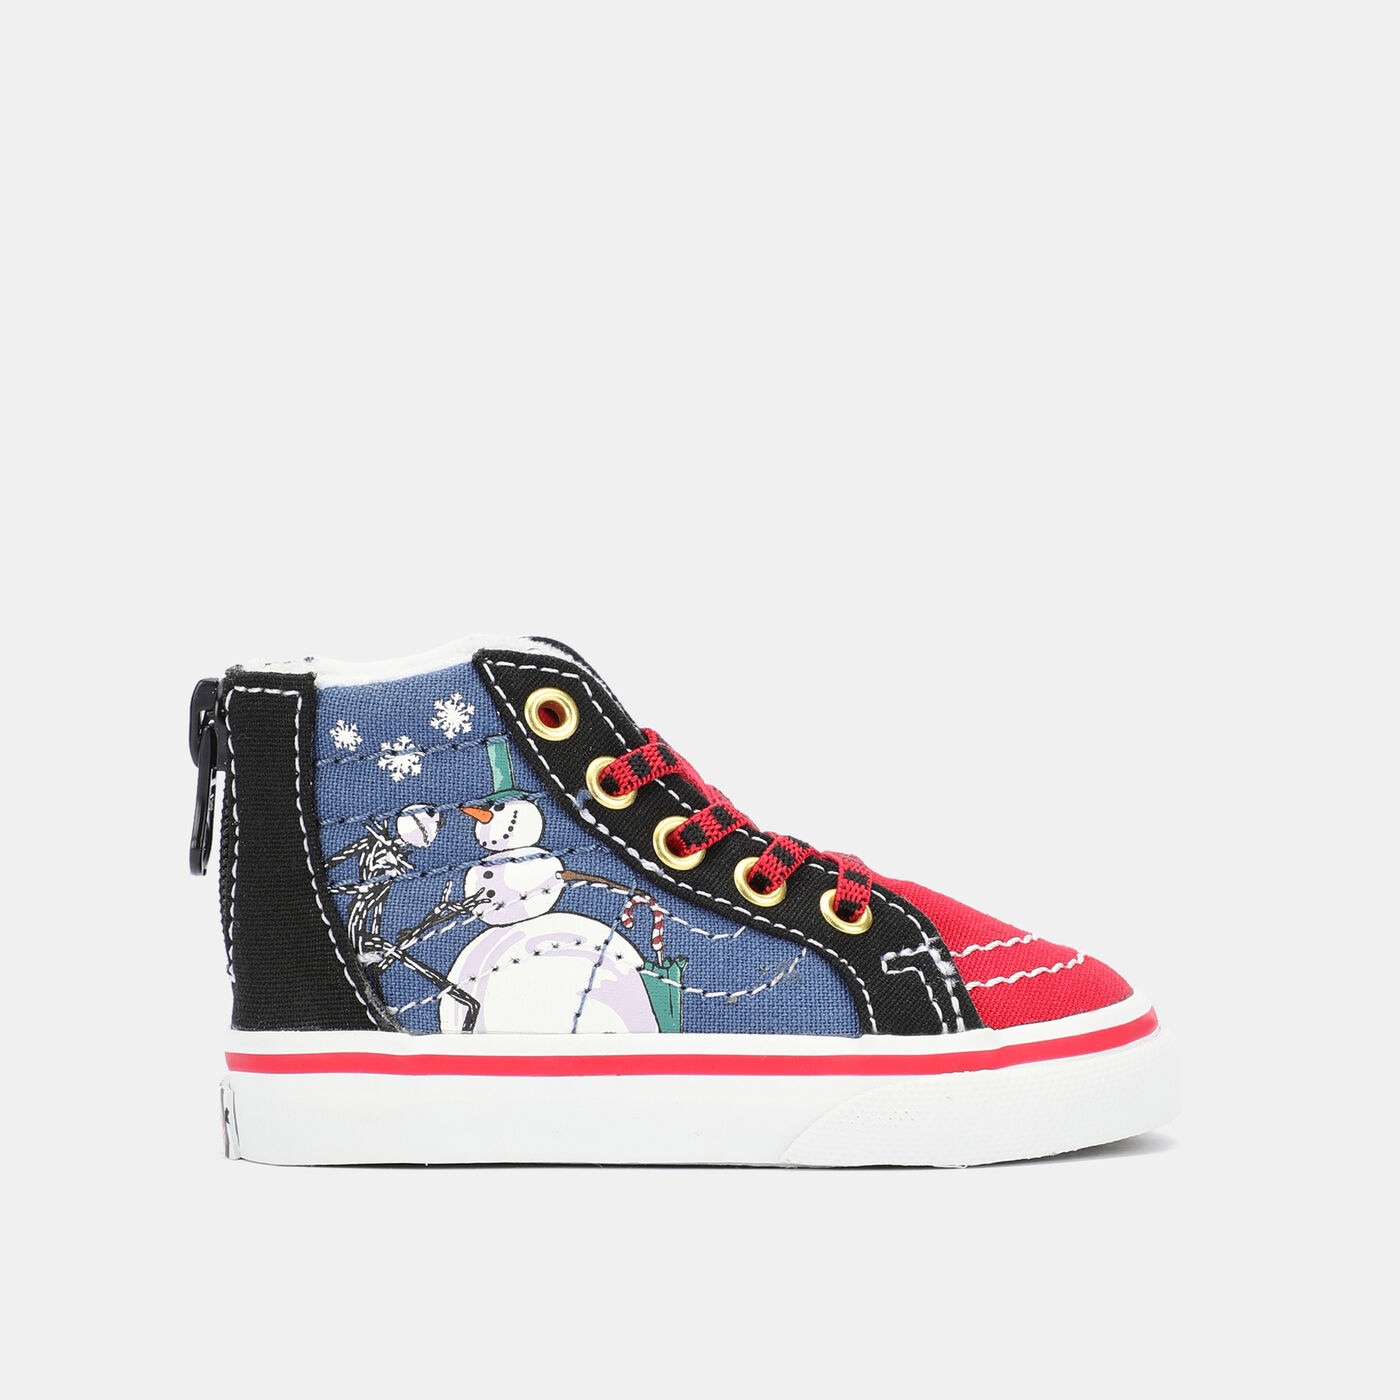 Kids' x The Nightmare Before Christmas Sk8-Hi Unisex Shoe (Baby and Toddler)